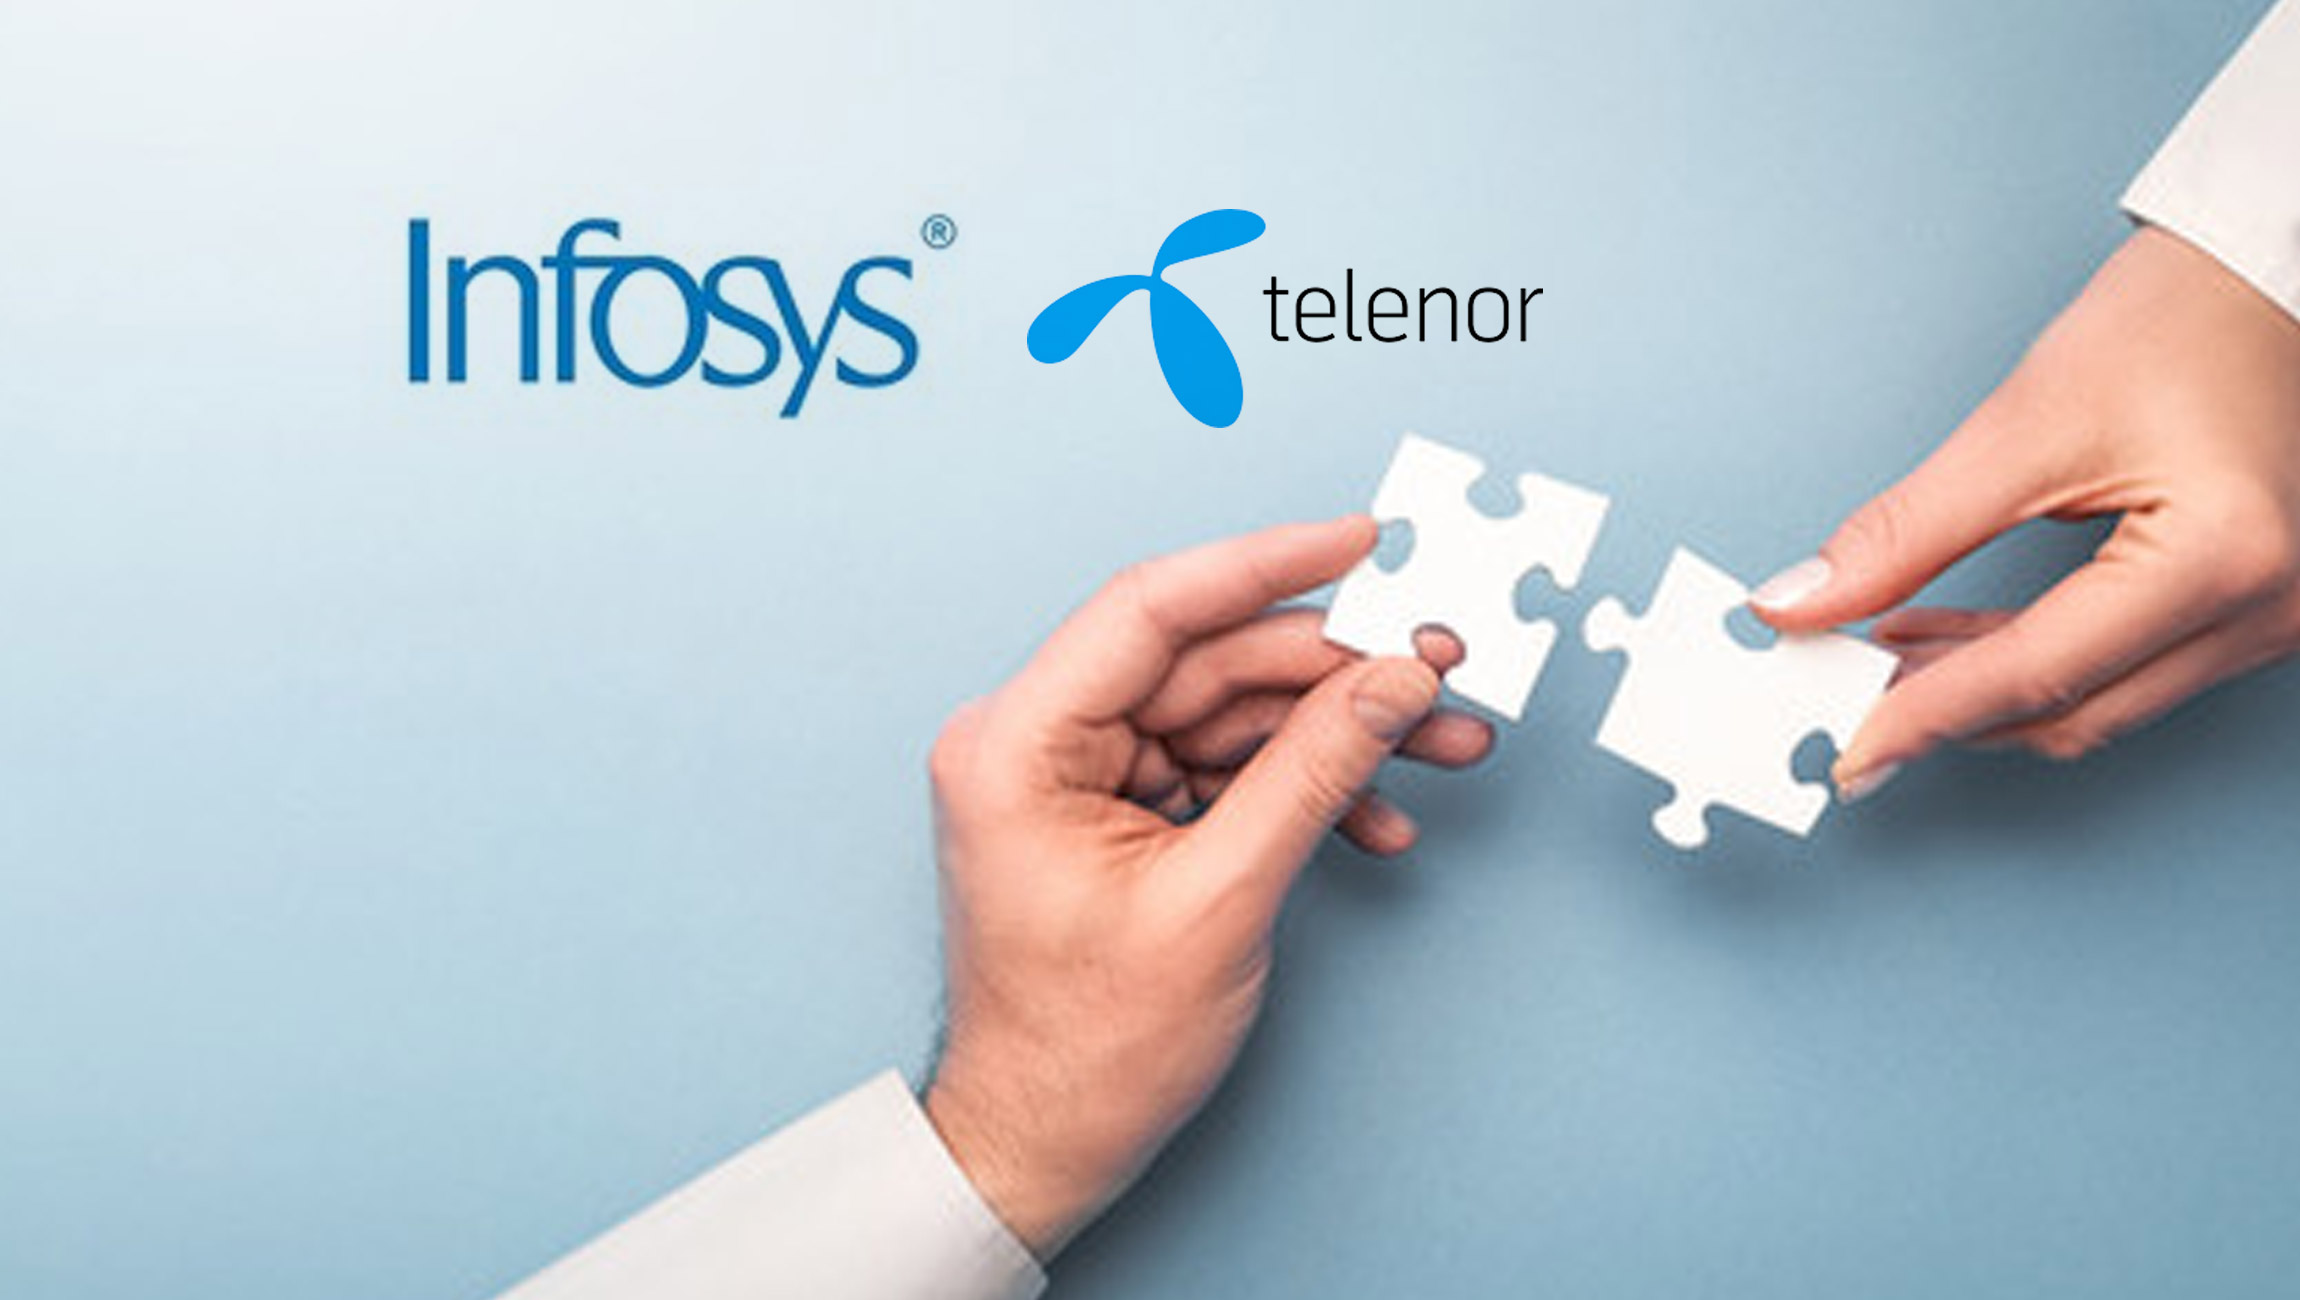 Infosys-collaborates-with-Telenor-to-transform-its-finance-and-supply-chain-operations-through-standardized_-Oracle-Cloud-ERP-solution